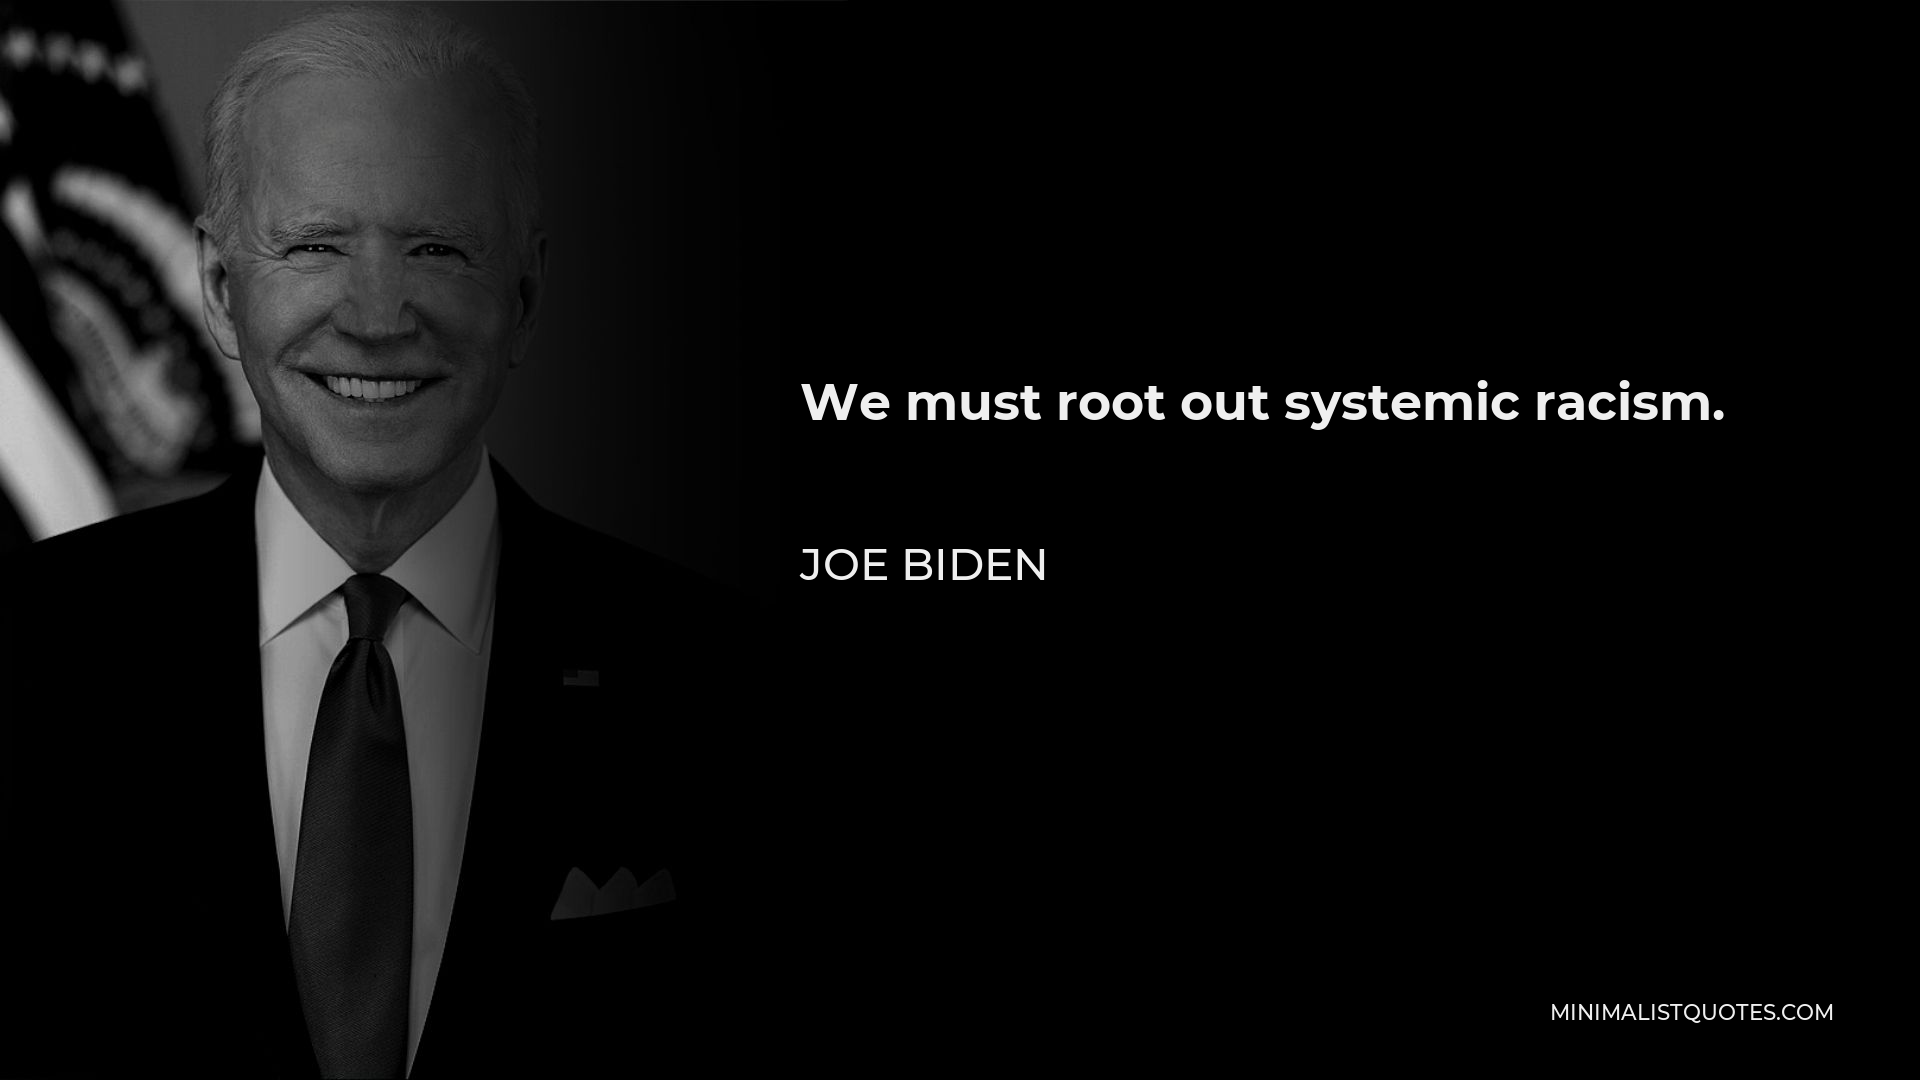 Joe Biden Quote - We must root out systemic racism.